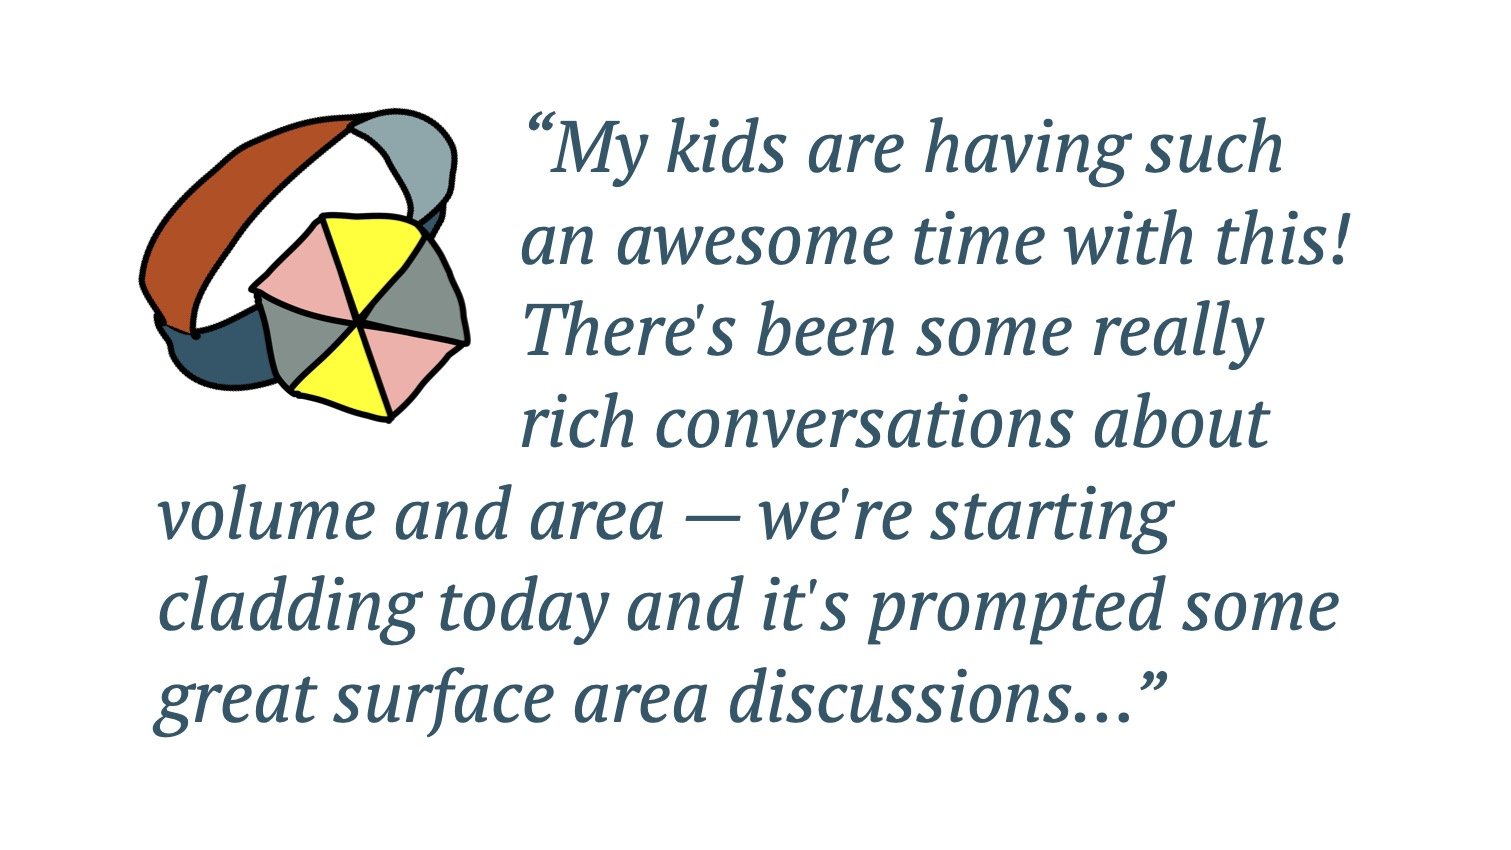 Quote: My kids are having such an awesome time with this! There's been some really rich conversations about volume and area.